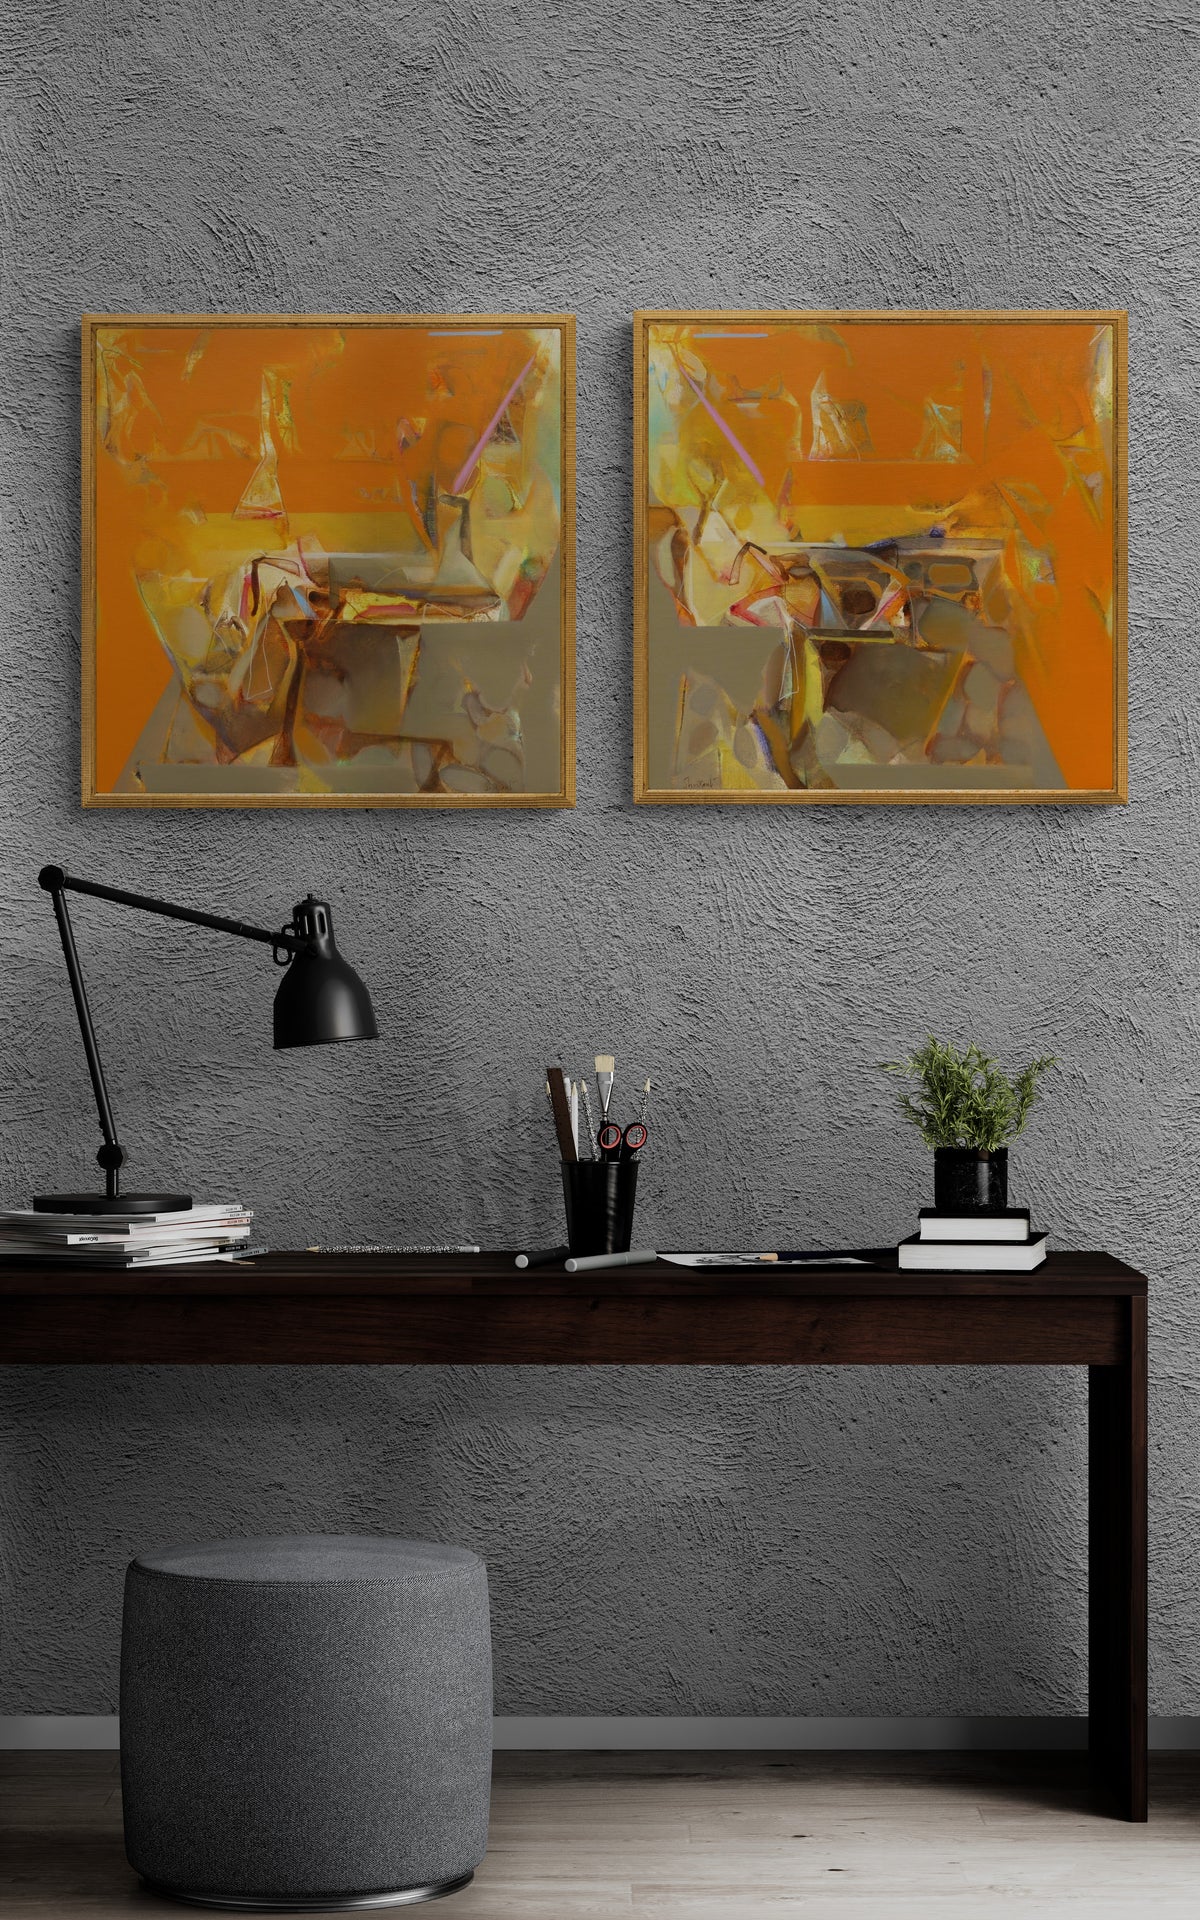 Shrikant Kadam creates a diptych with orange and earthy abstract works. 